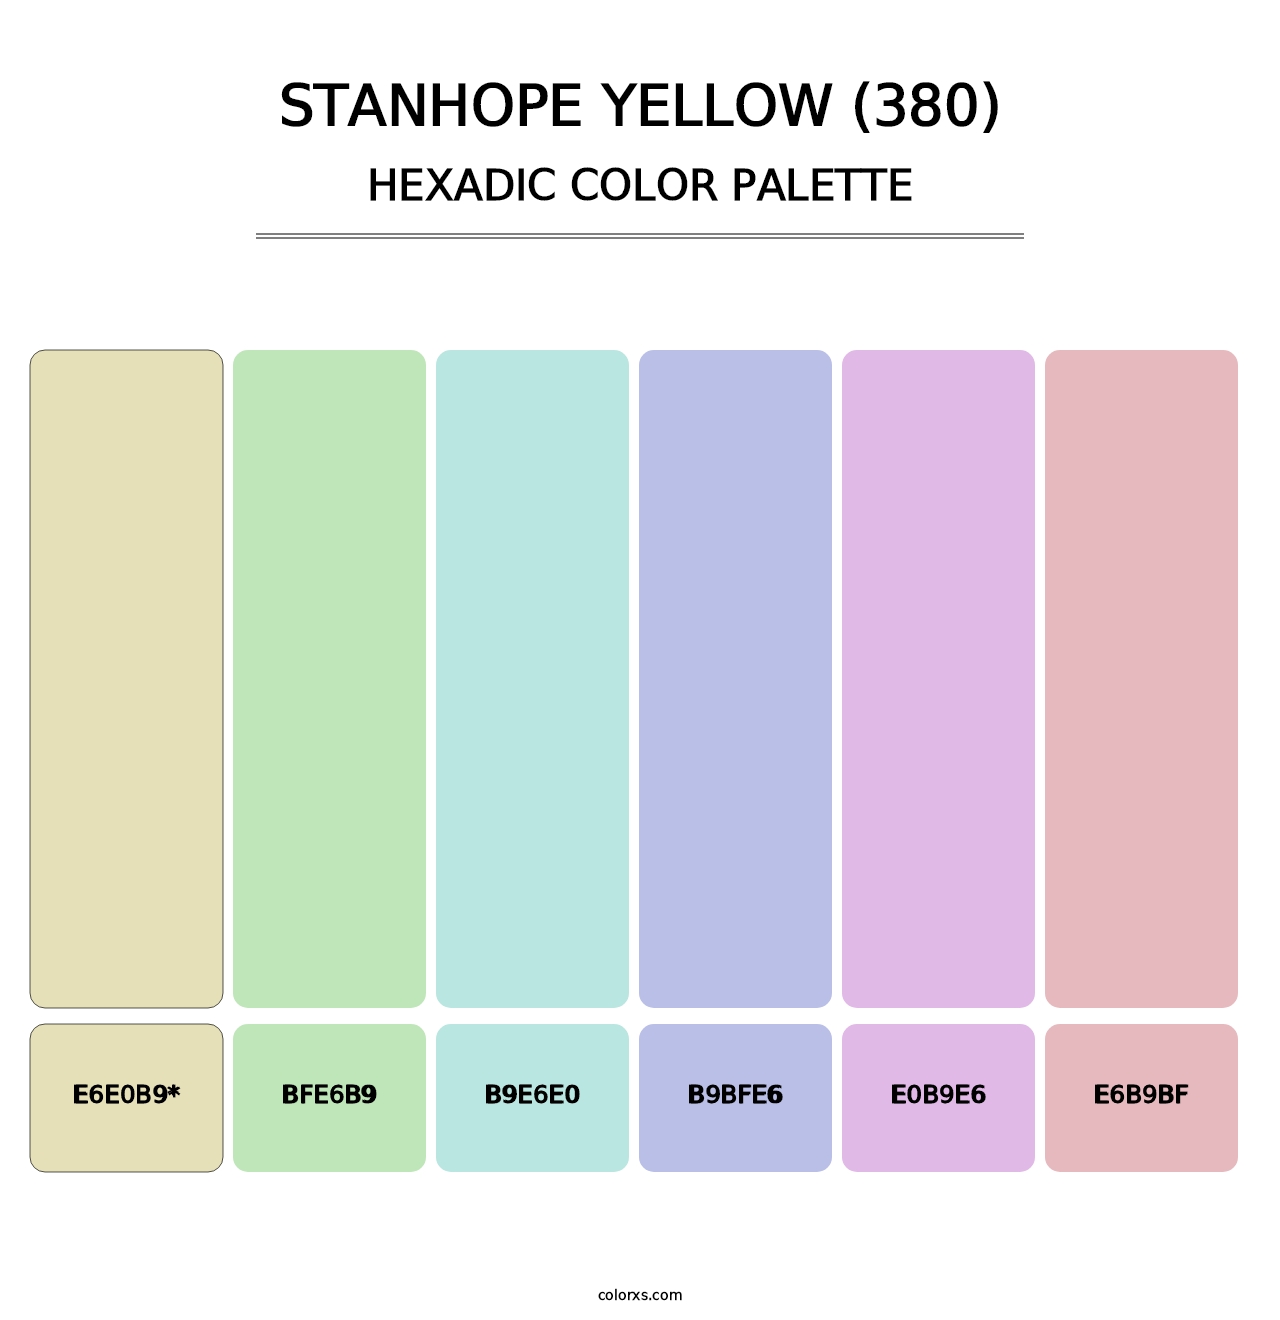 Stanhope Yellow (380) - Hexadic Color Palette